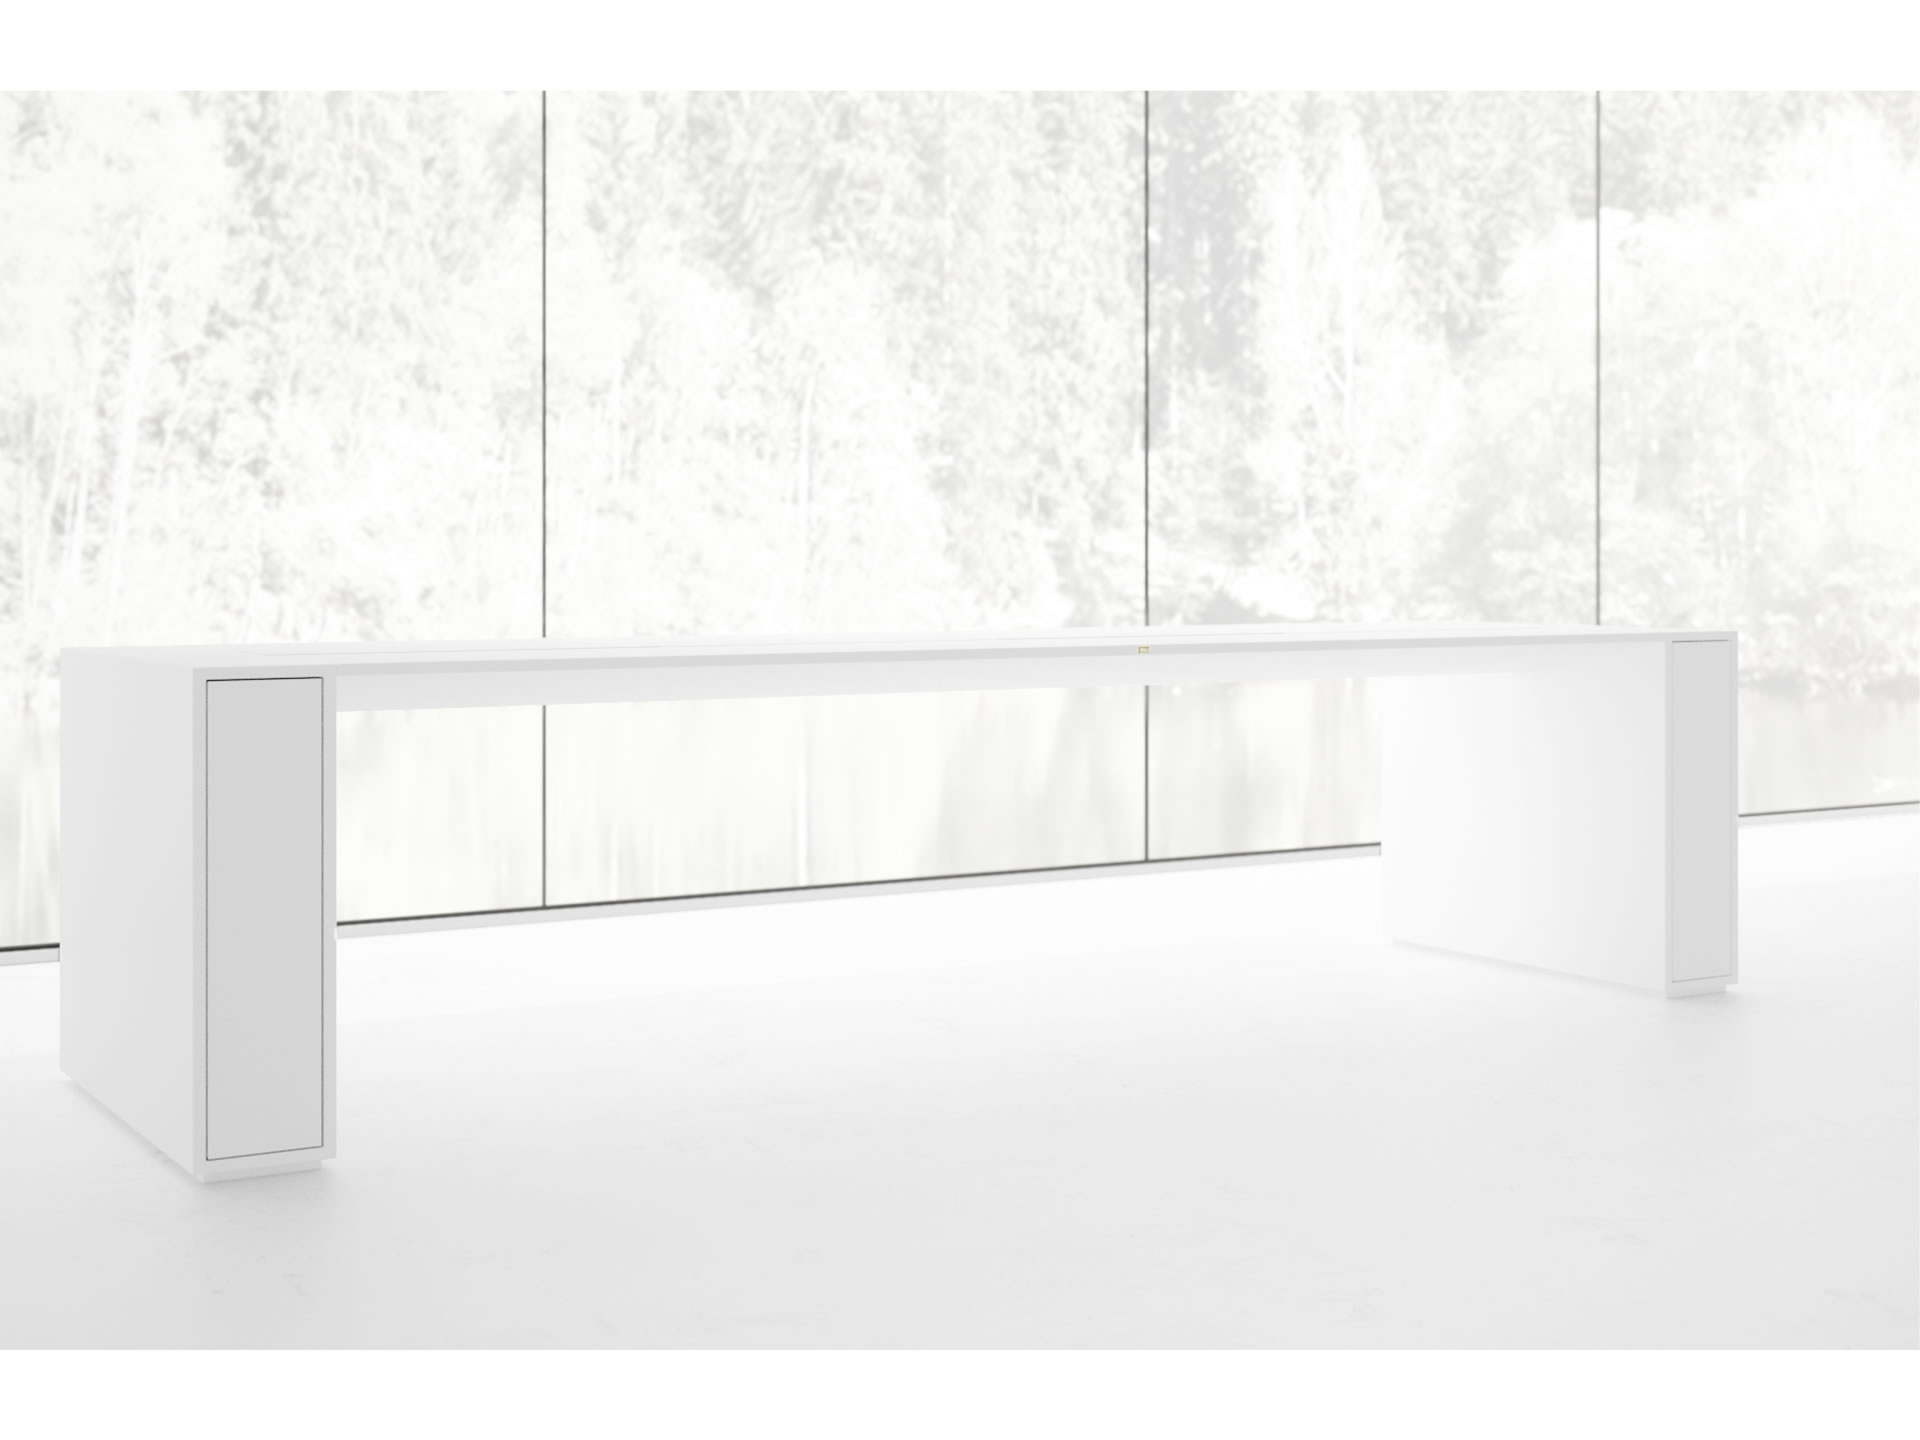 RECHTECK CONFERENCE TABLE I I Customize White Meeting Table with Extensible Hifi Shelves